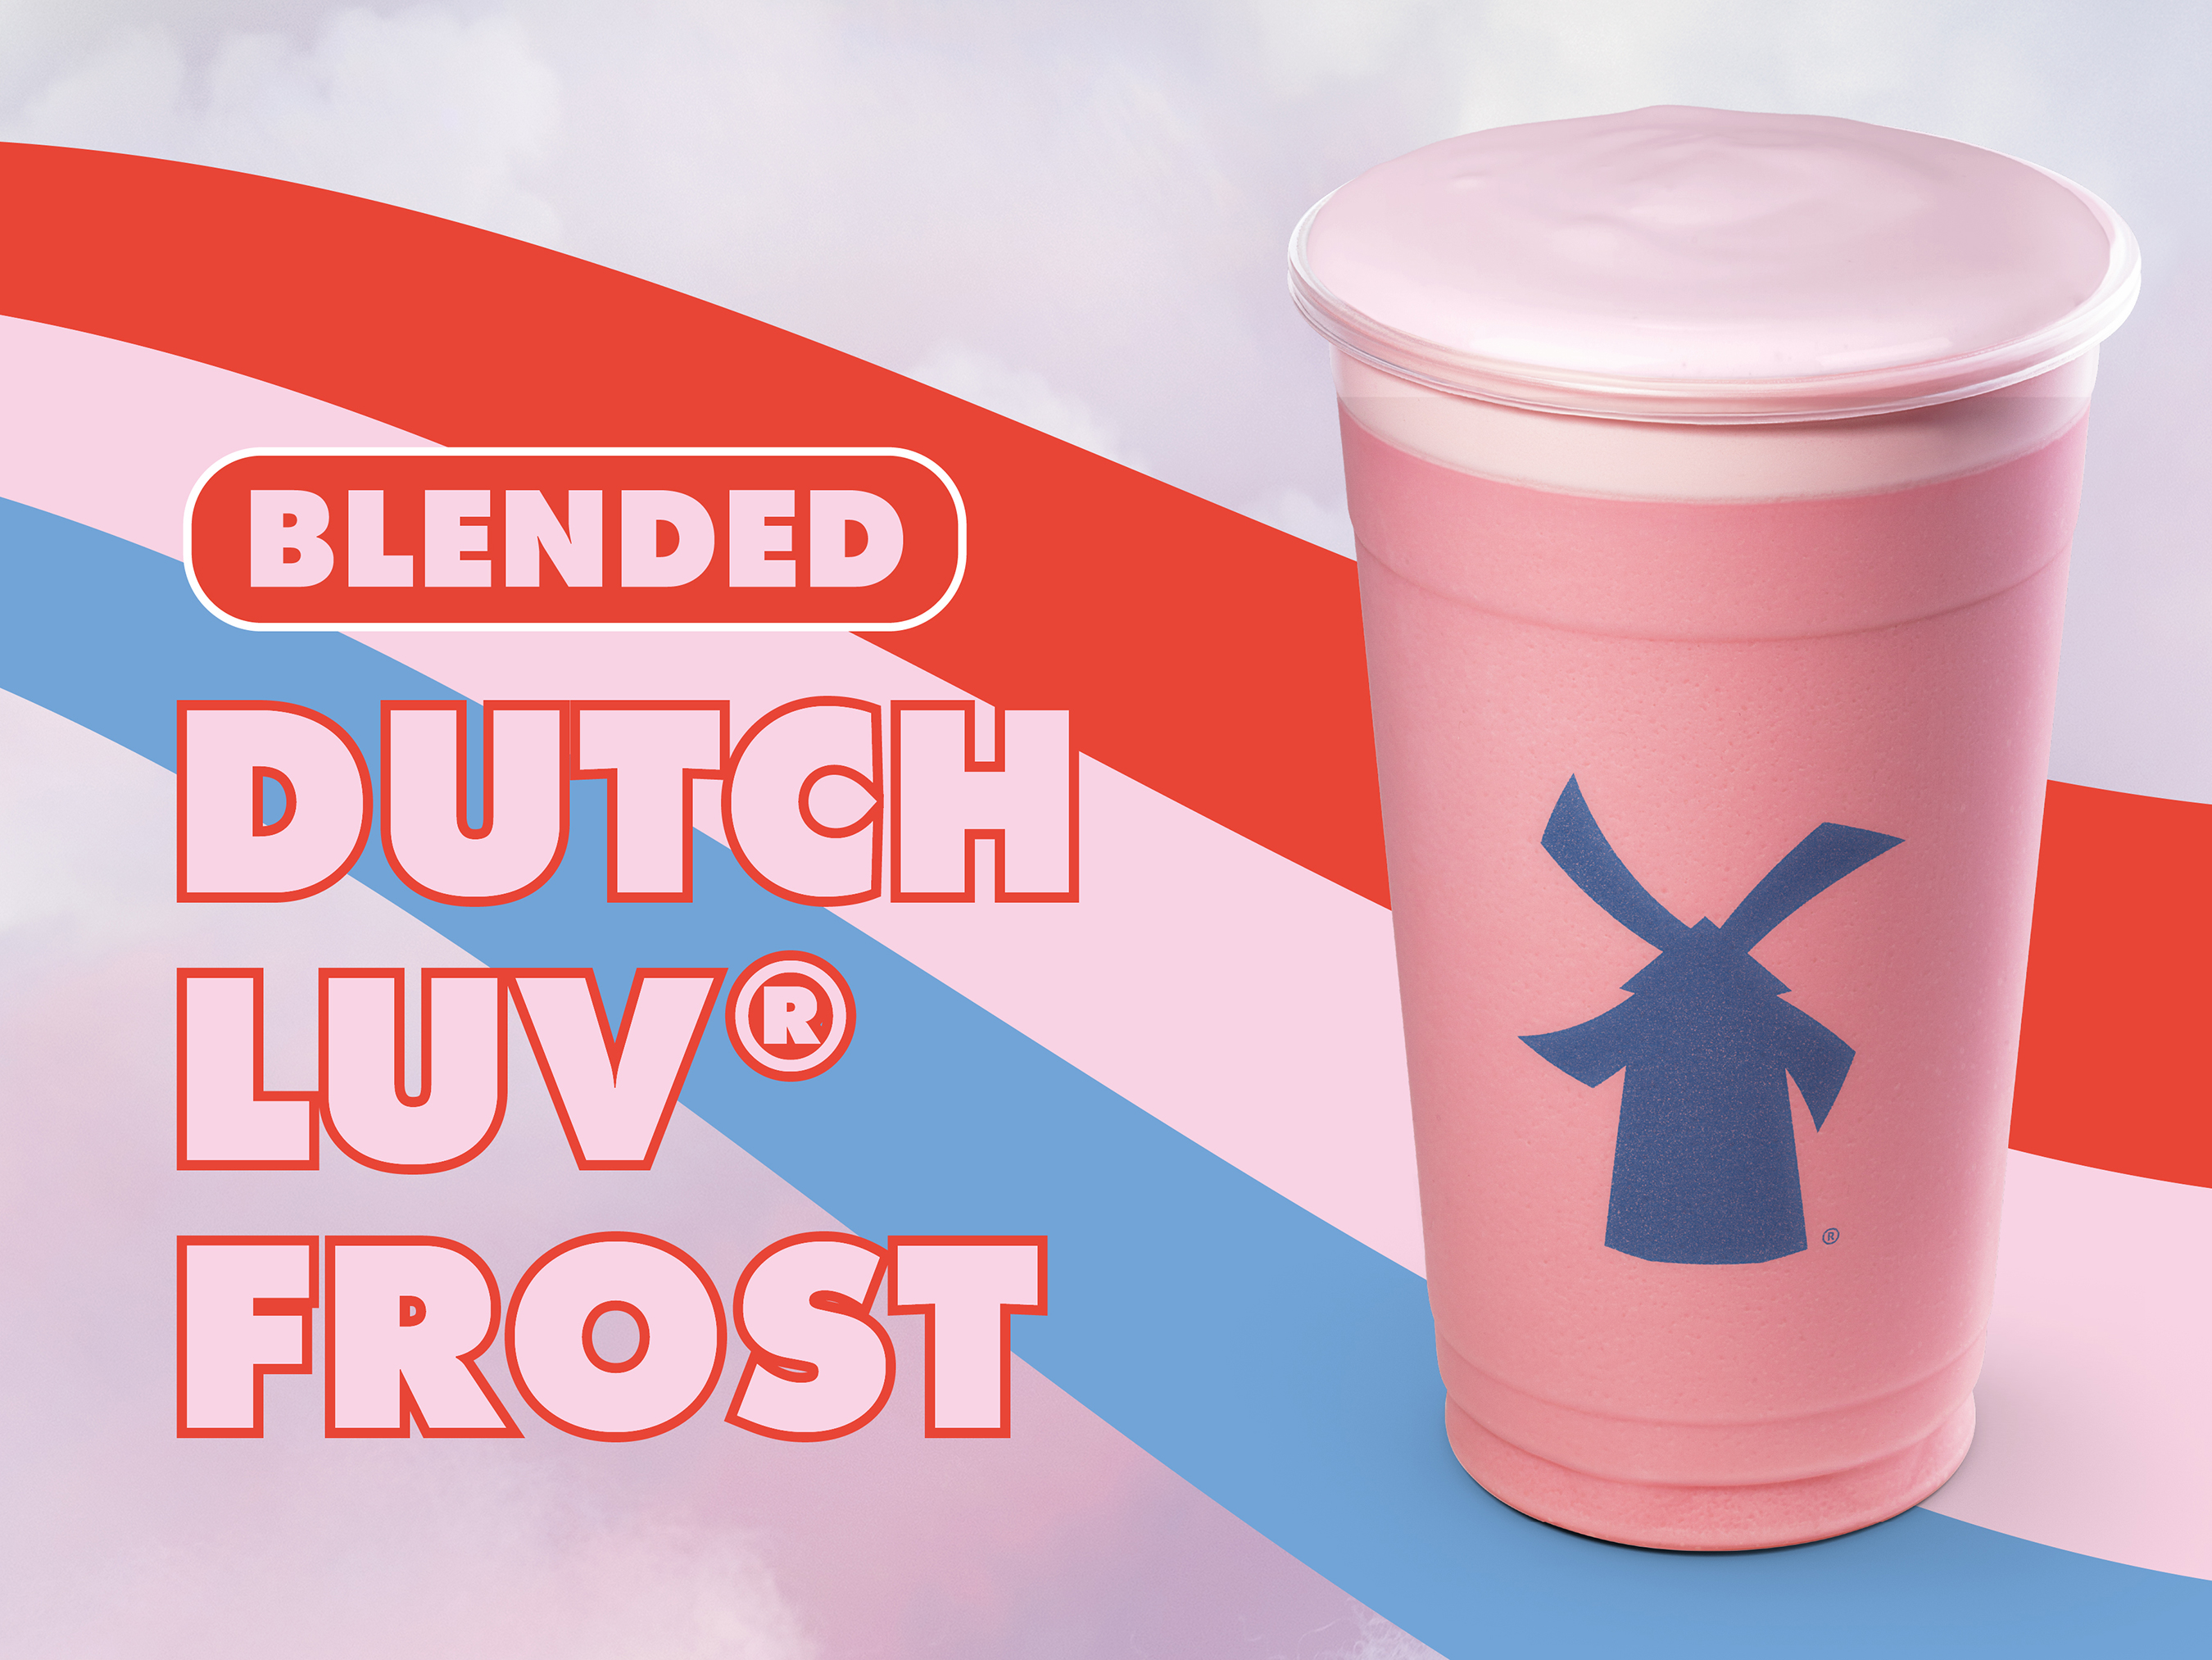 Dutch Luv Frost: The Dutch Luv Frost features a blended frosted sugar cookie shake topped with pink Soft Top